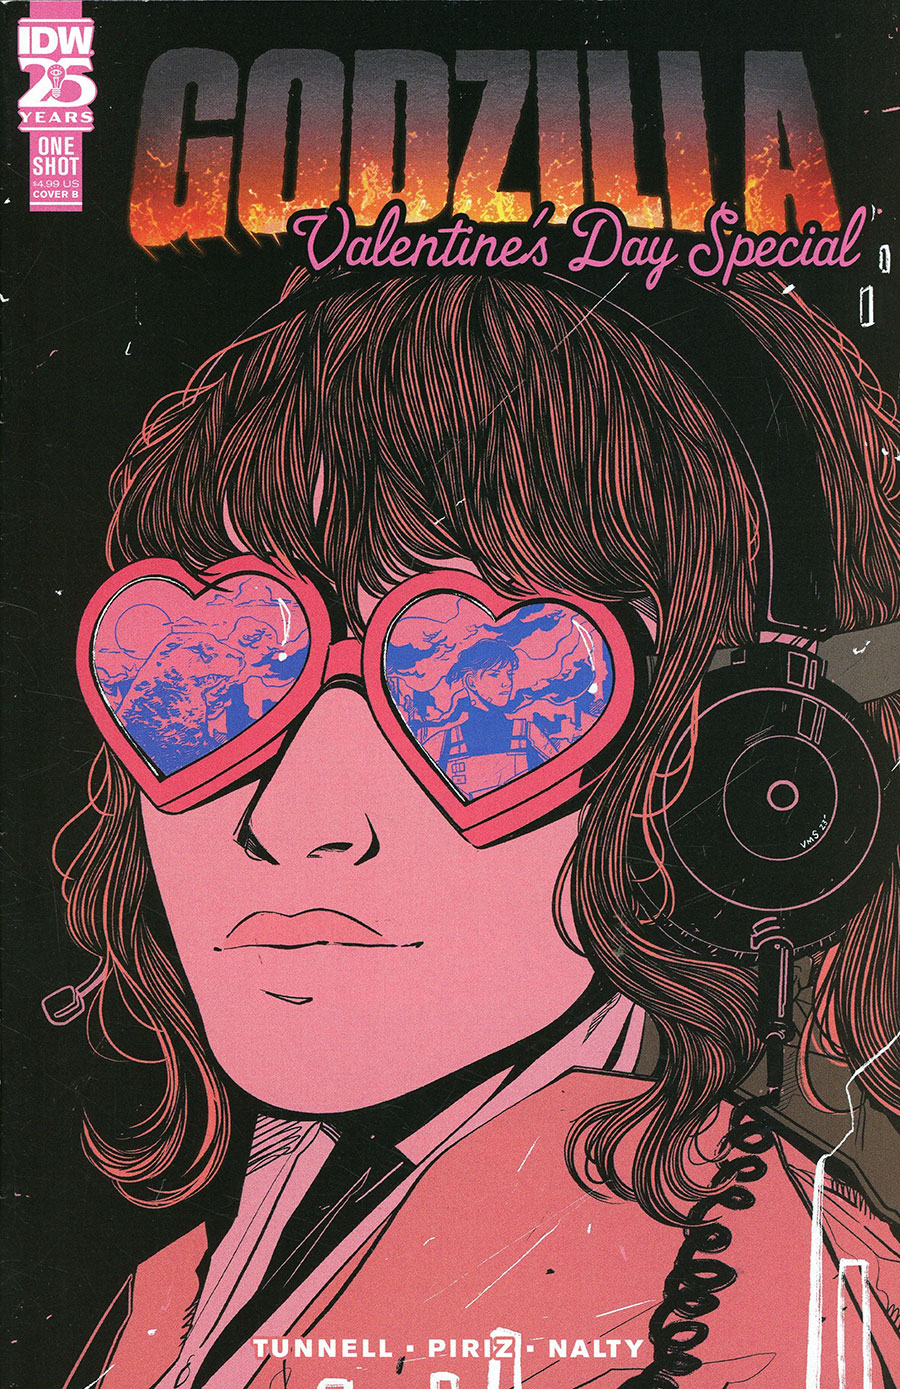 Godzilla Valentines Day Special #1 (One Shot) Cover B Variant Valentine M Smith Cover